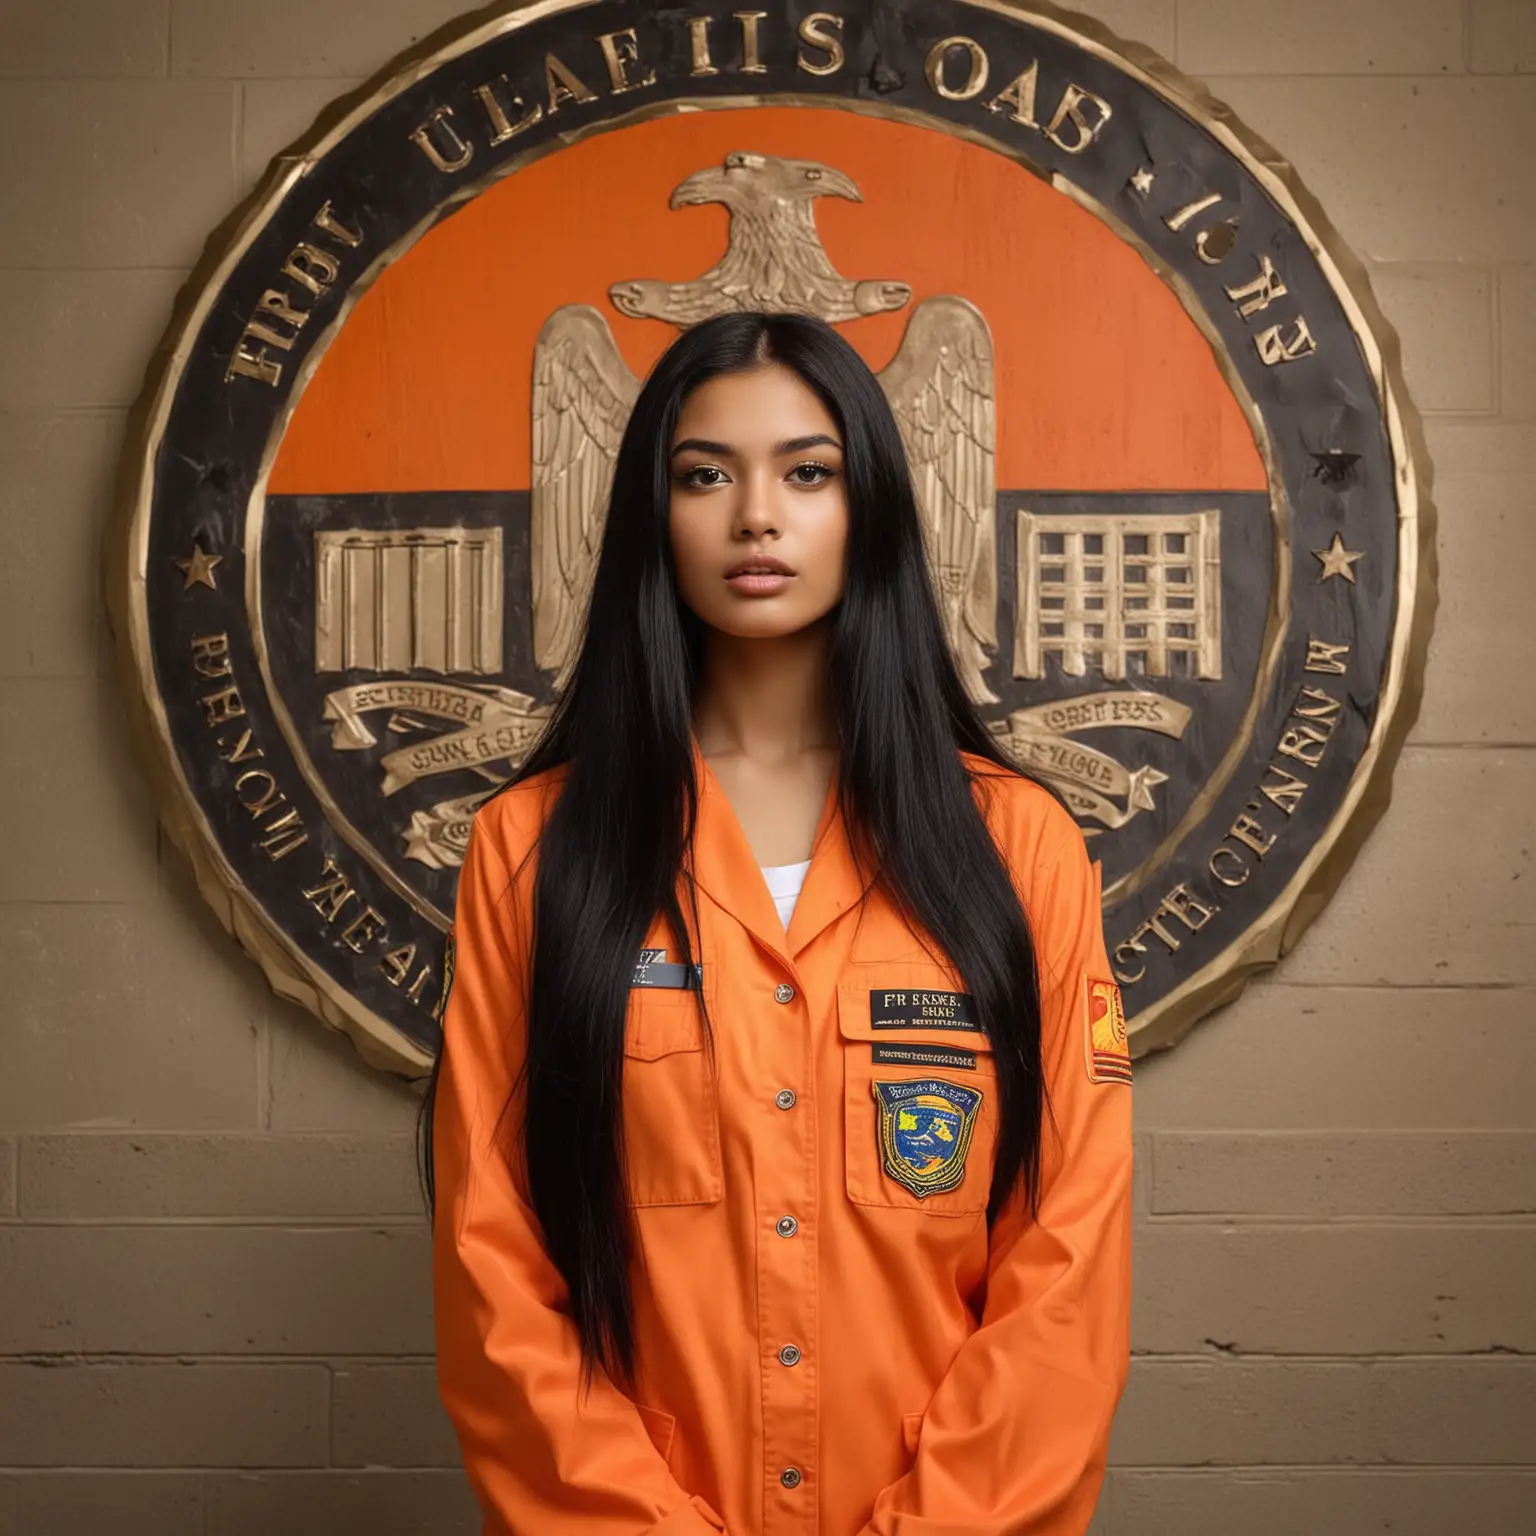 Young-Model-in-Orange-Prison-Uniform-at-Government-Office